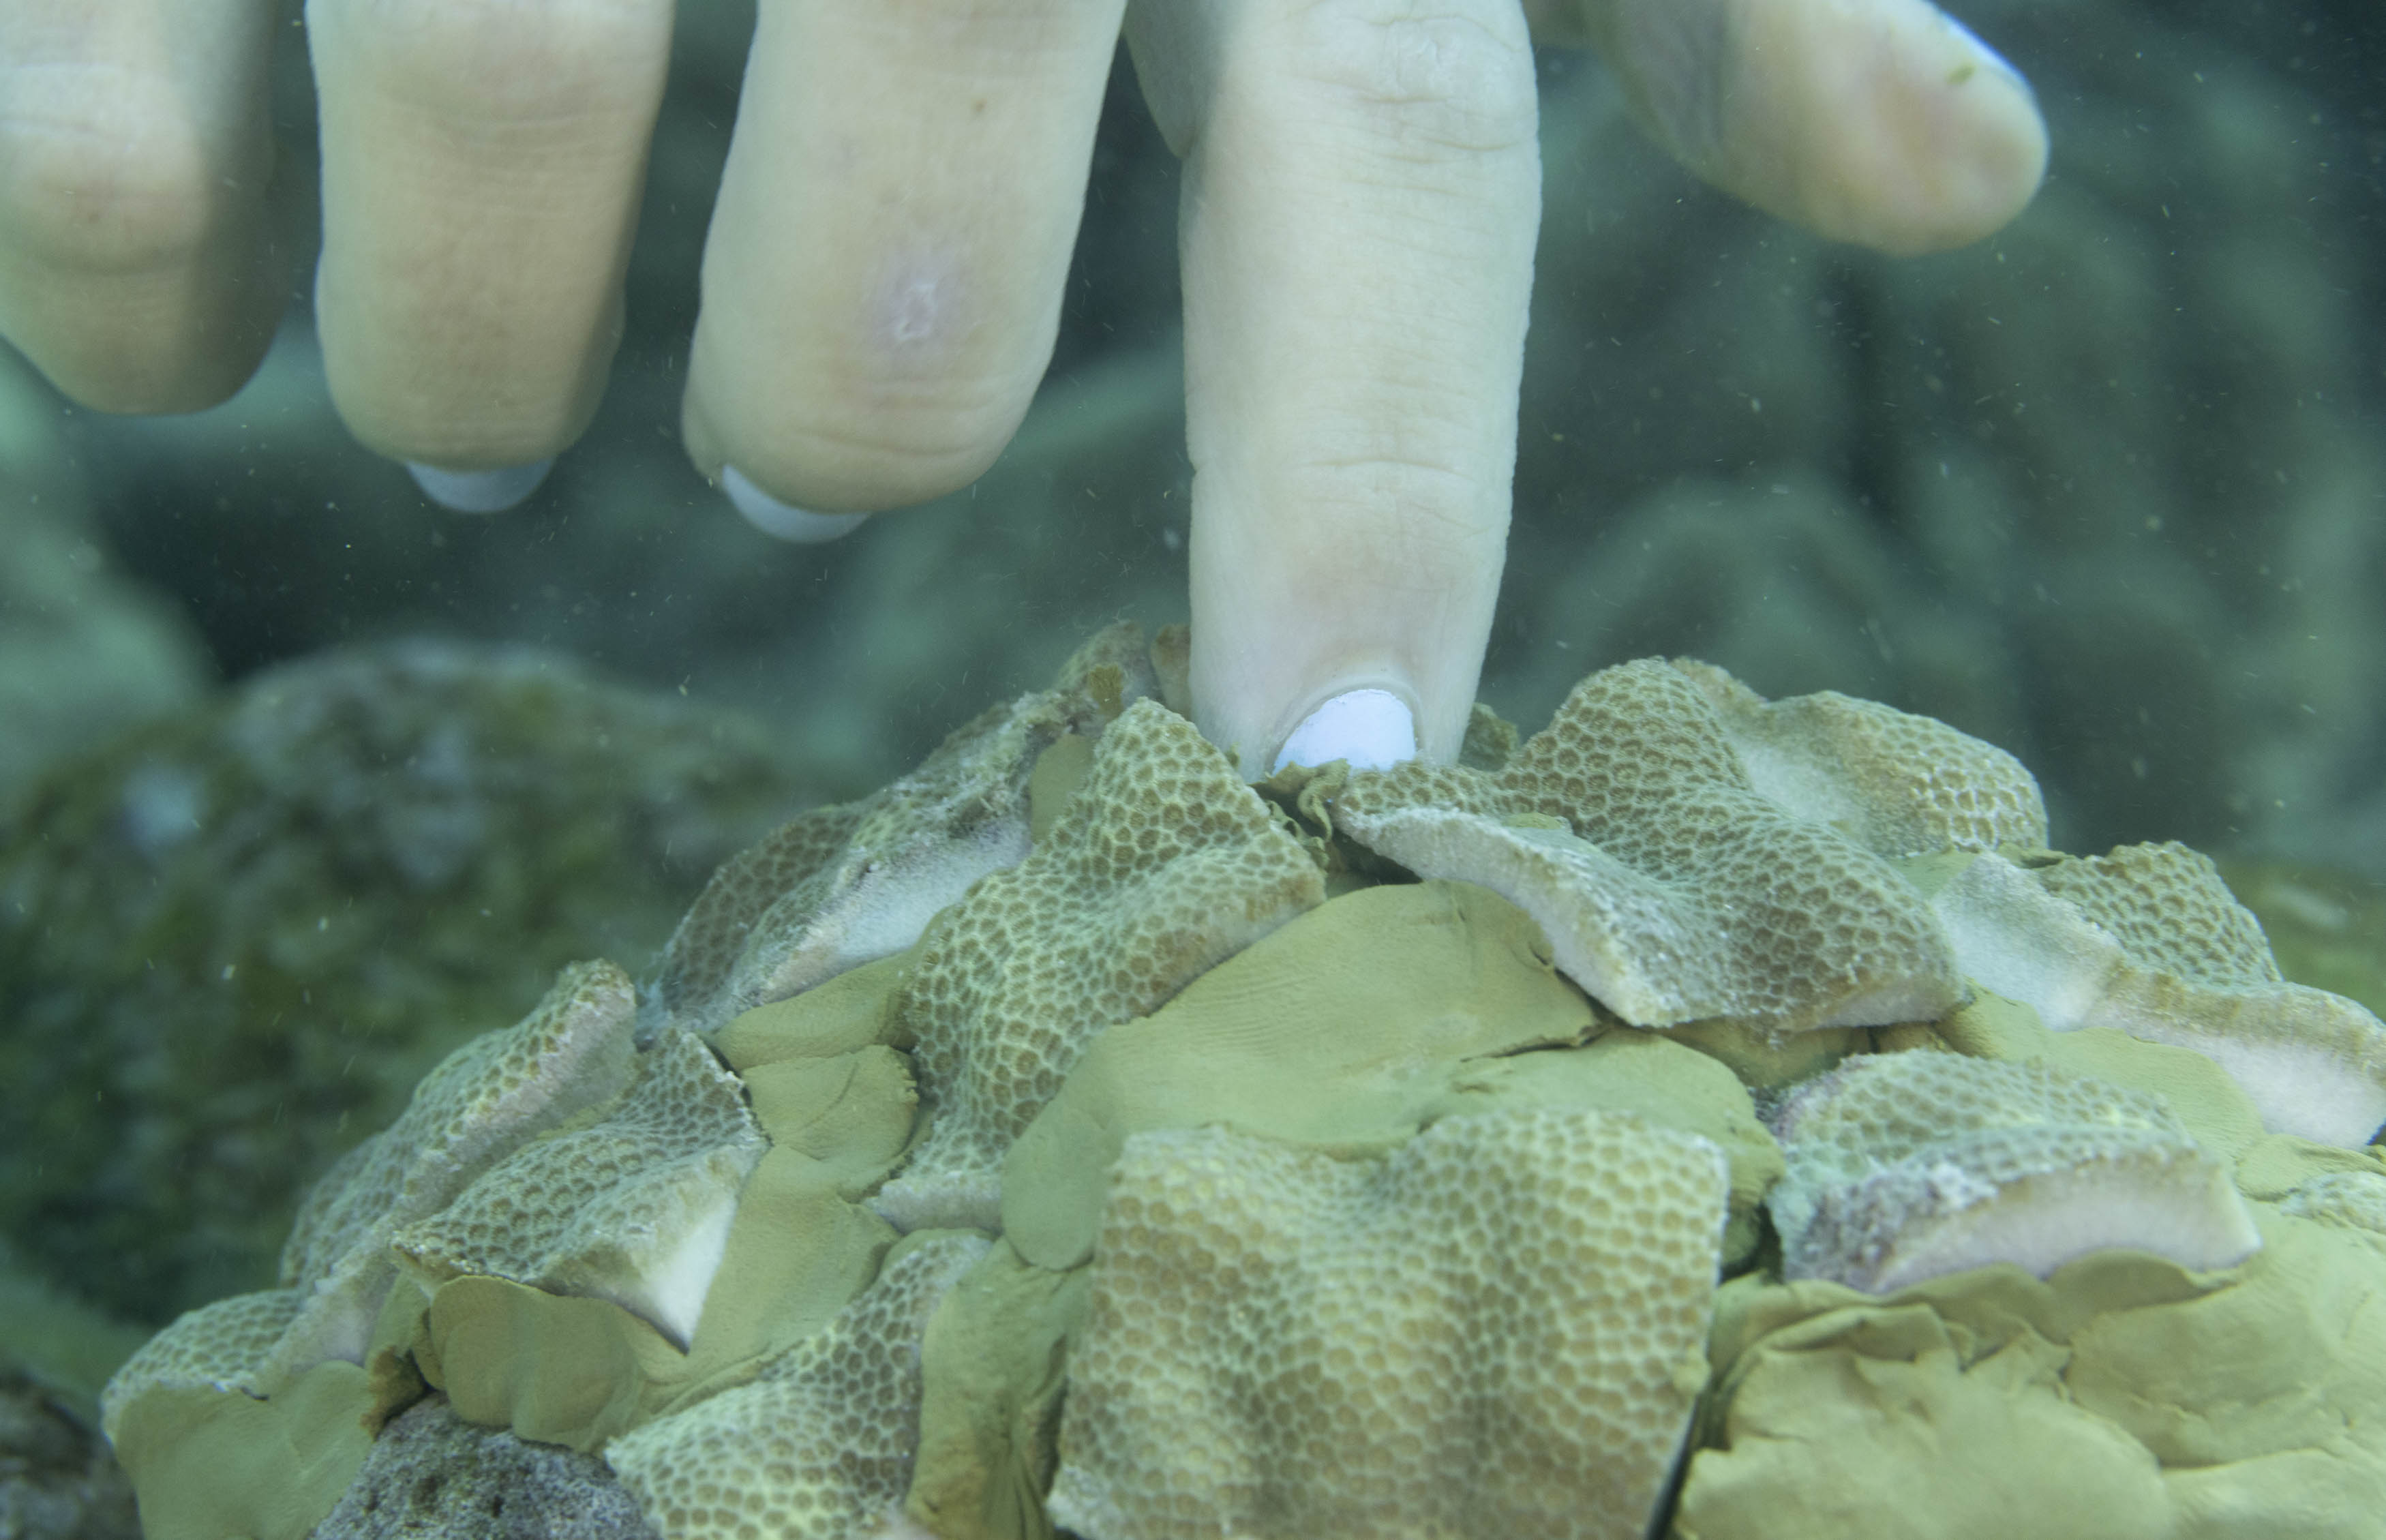 A close-up of someone’s fingers attaching cuttings of light brown lobe coral to the reef with green epoxy.